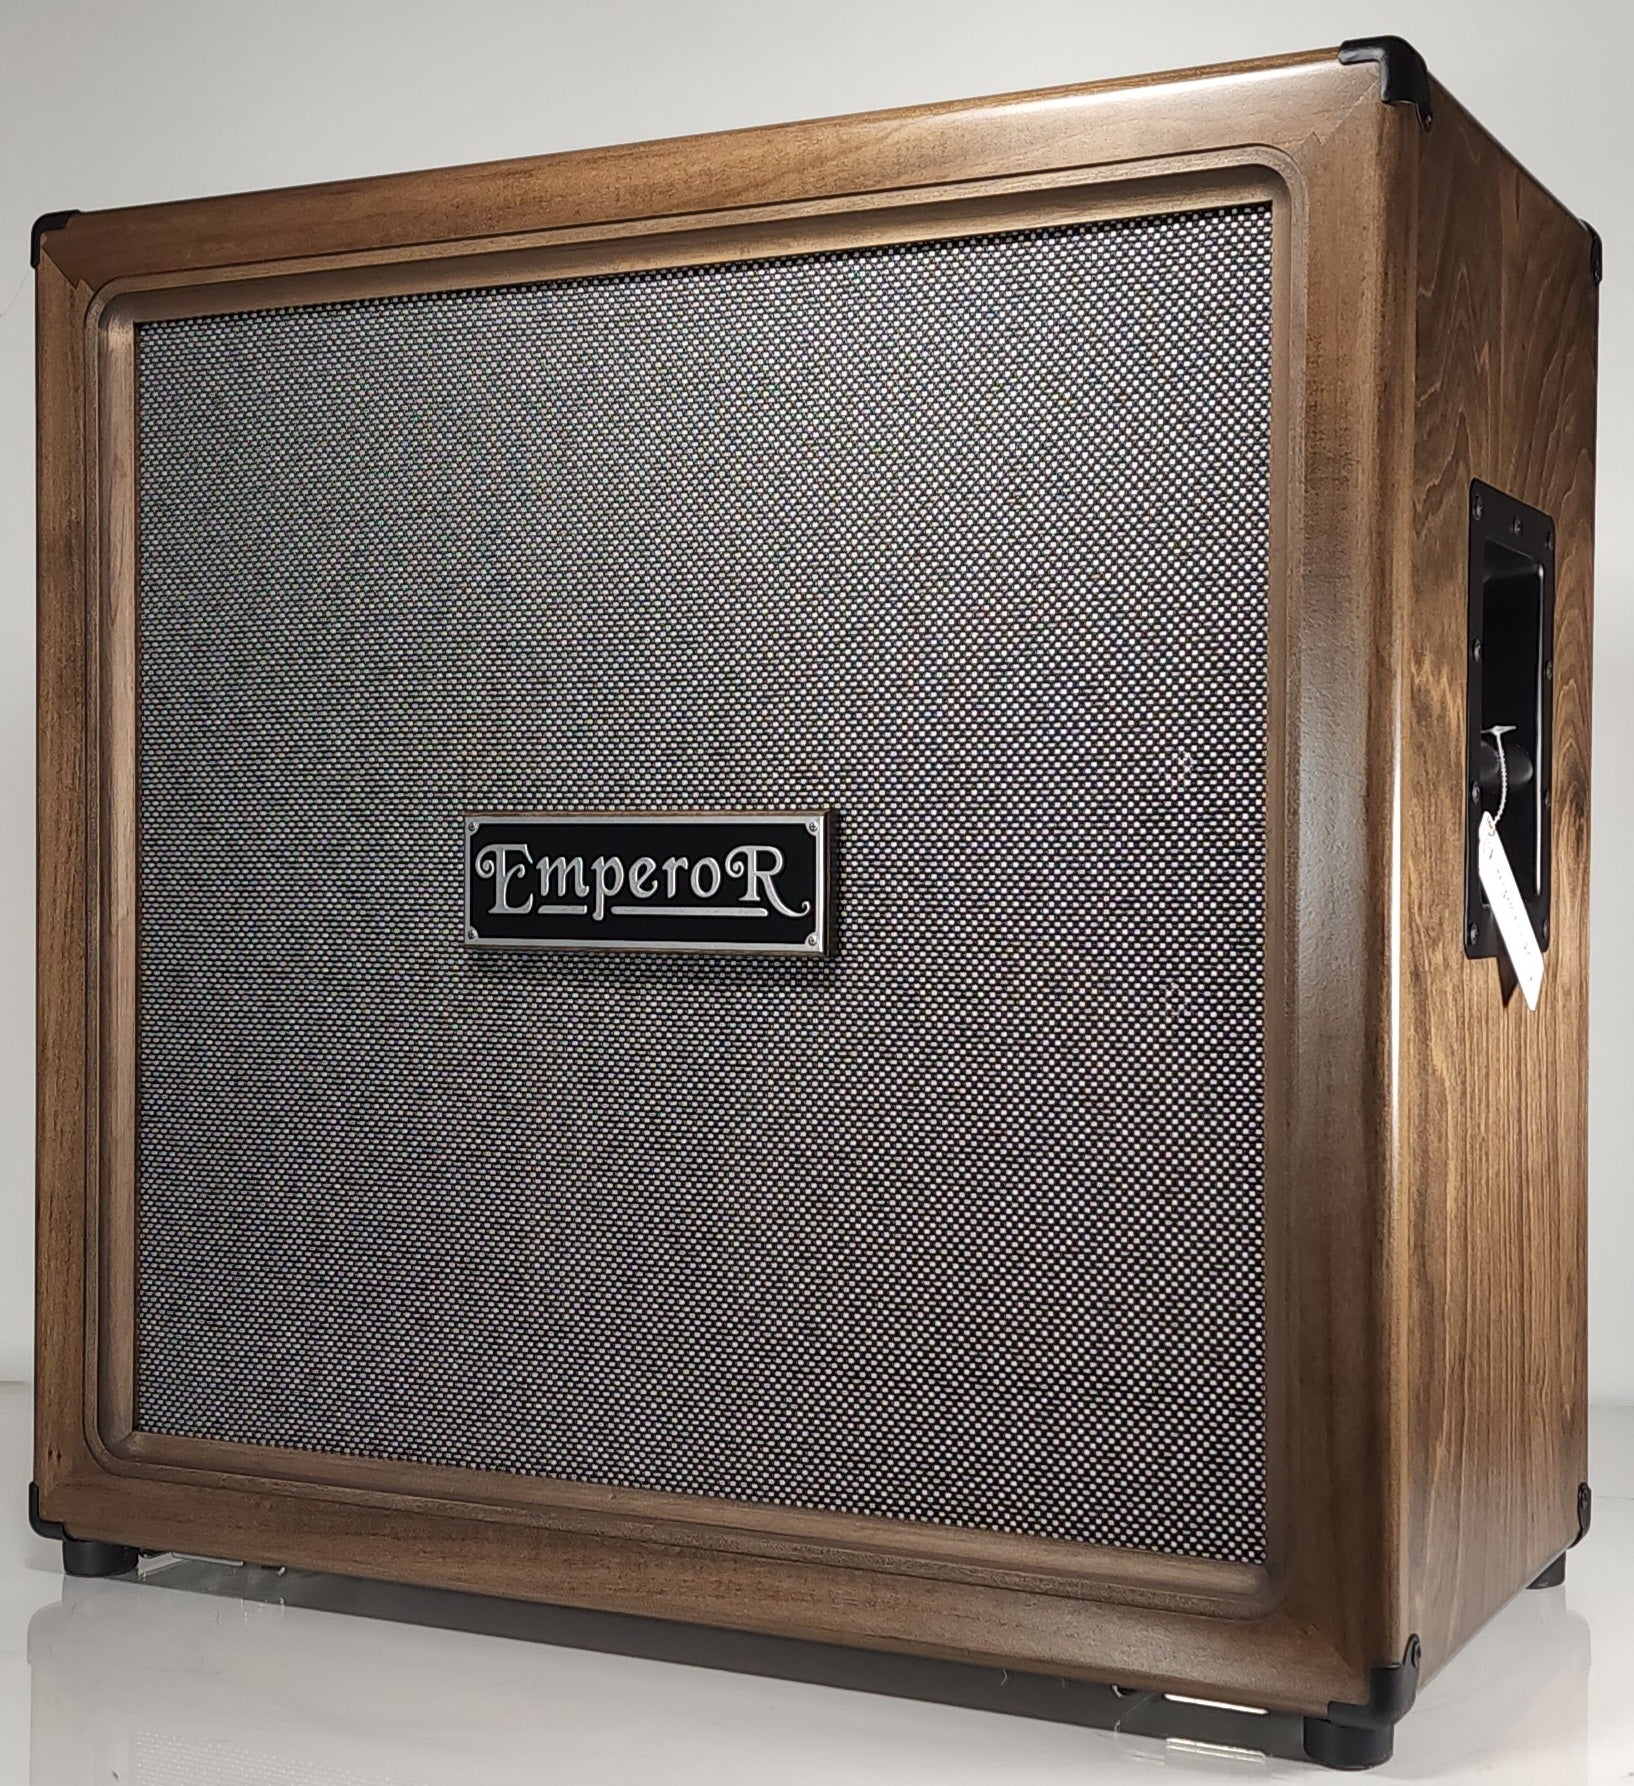 Standard 4x12 RS Guitar Cabinet - Emperor Cabinets